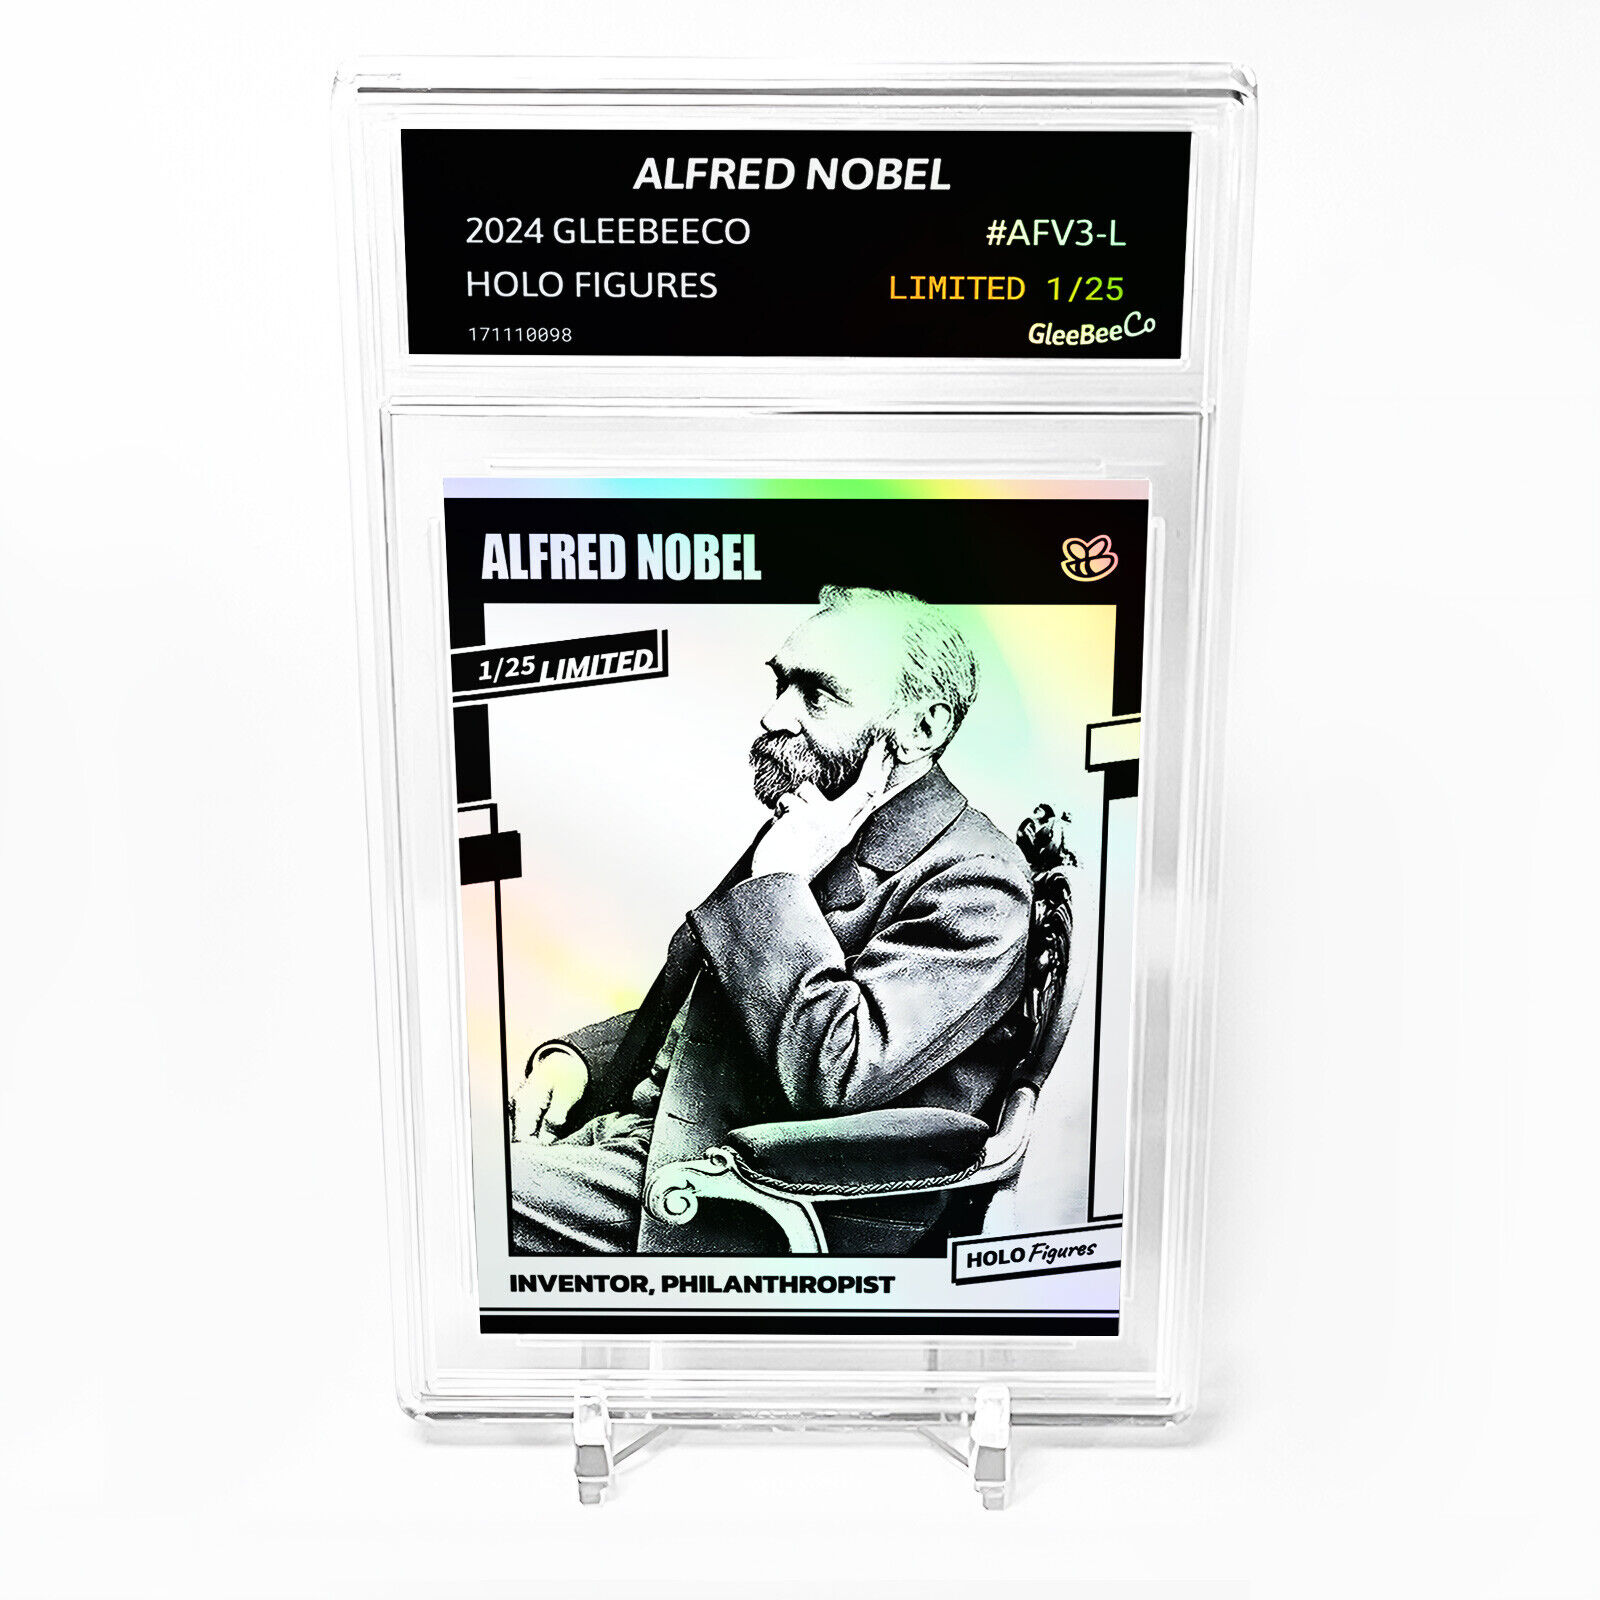 ALFRED NOBEL Card 2024 GleeBeeCo Holo Figures #AFV3-L Limited to Only /25